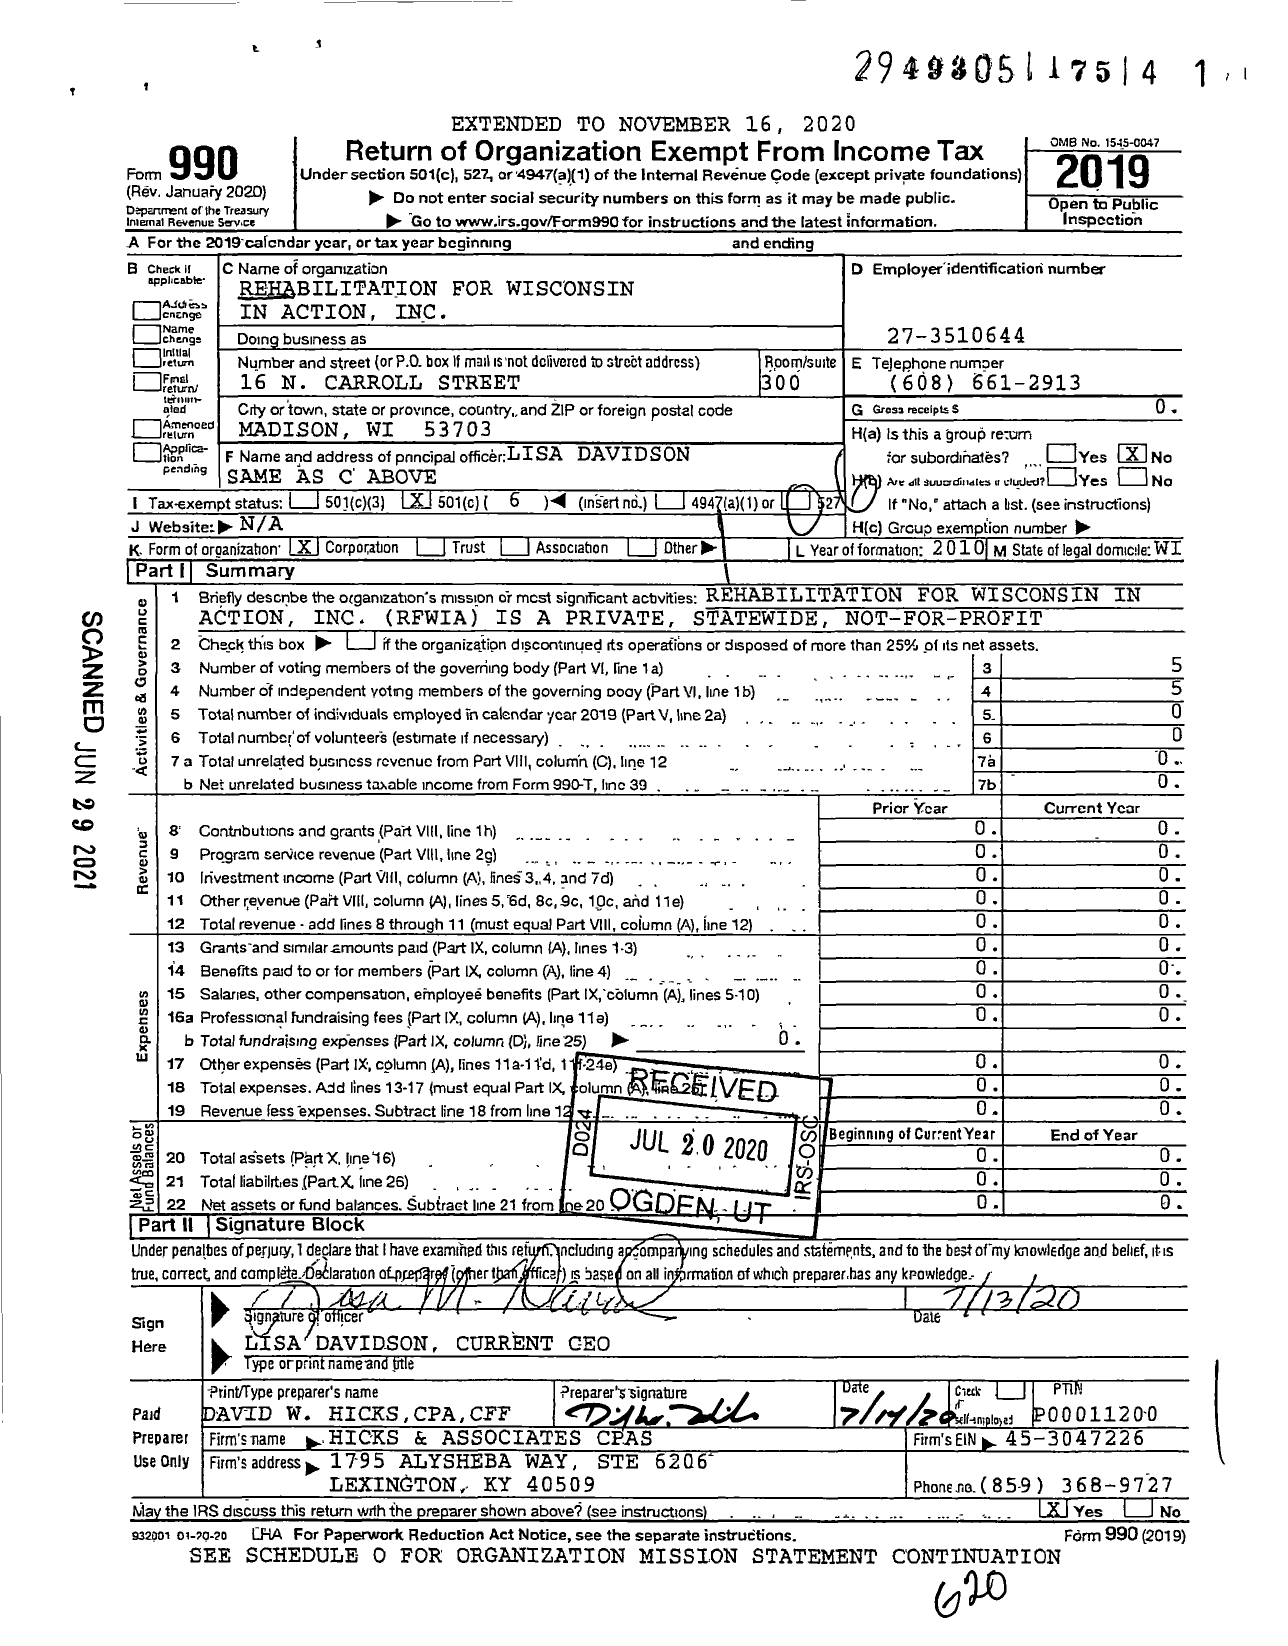 Image of first page of 2019 Form 990O for Rehabilitation for Wisconsin in Action